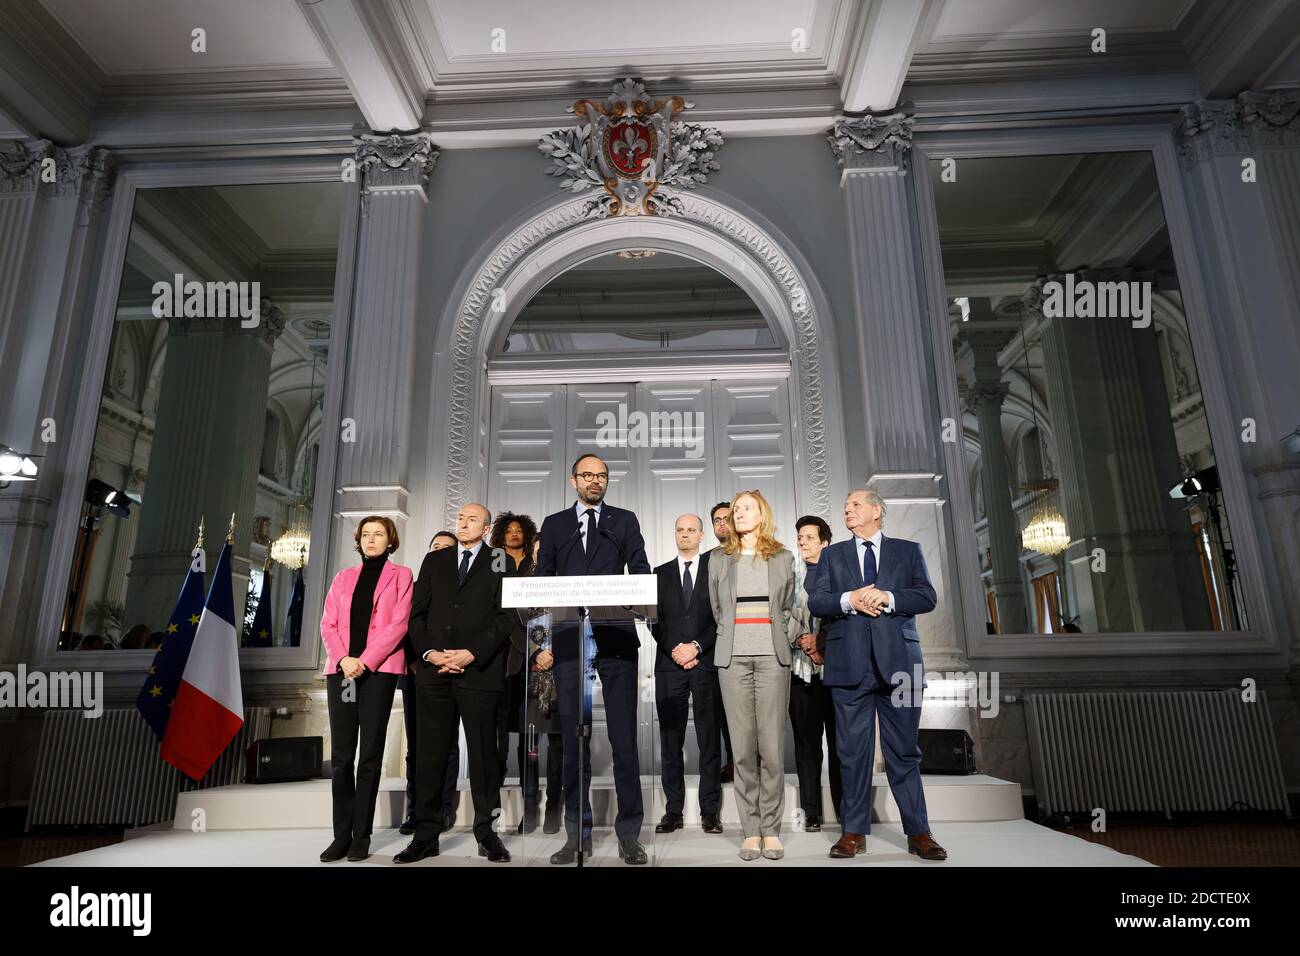 French Prime Minister Edouard Philippe, flanked by members of the government, French Defence Minister Florence Parly, French Interior Minister Gerard Collomb, French Justice Minister Nicole Belloubet, French Minister for the Territorial Cohesion Jacques Mezard, French Minister of Public Action and Accounts Gerald Darmanin, French Sports Minister Laura Flessel, French Minister for Solidarity and Health Agnes Buzyn, French Education Minister Jean-Michel Blanquer, French Junior Minister for the Digital Sector Mounir Mahjoubi and French Minister of Higher Education, Research and Innovation Frederi Stock Photo